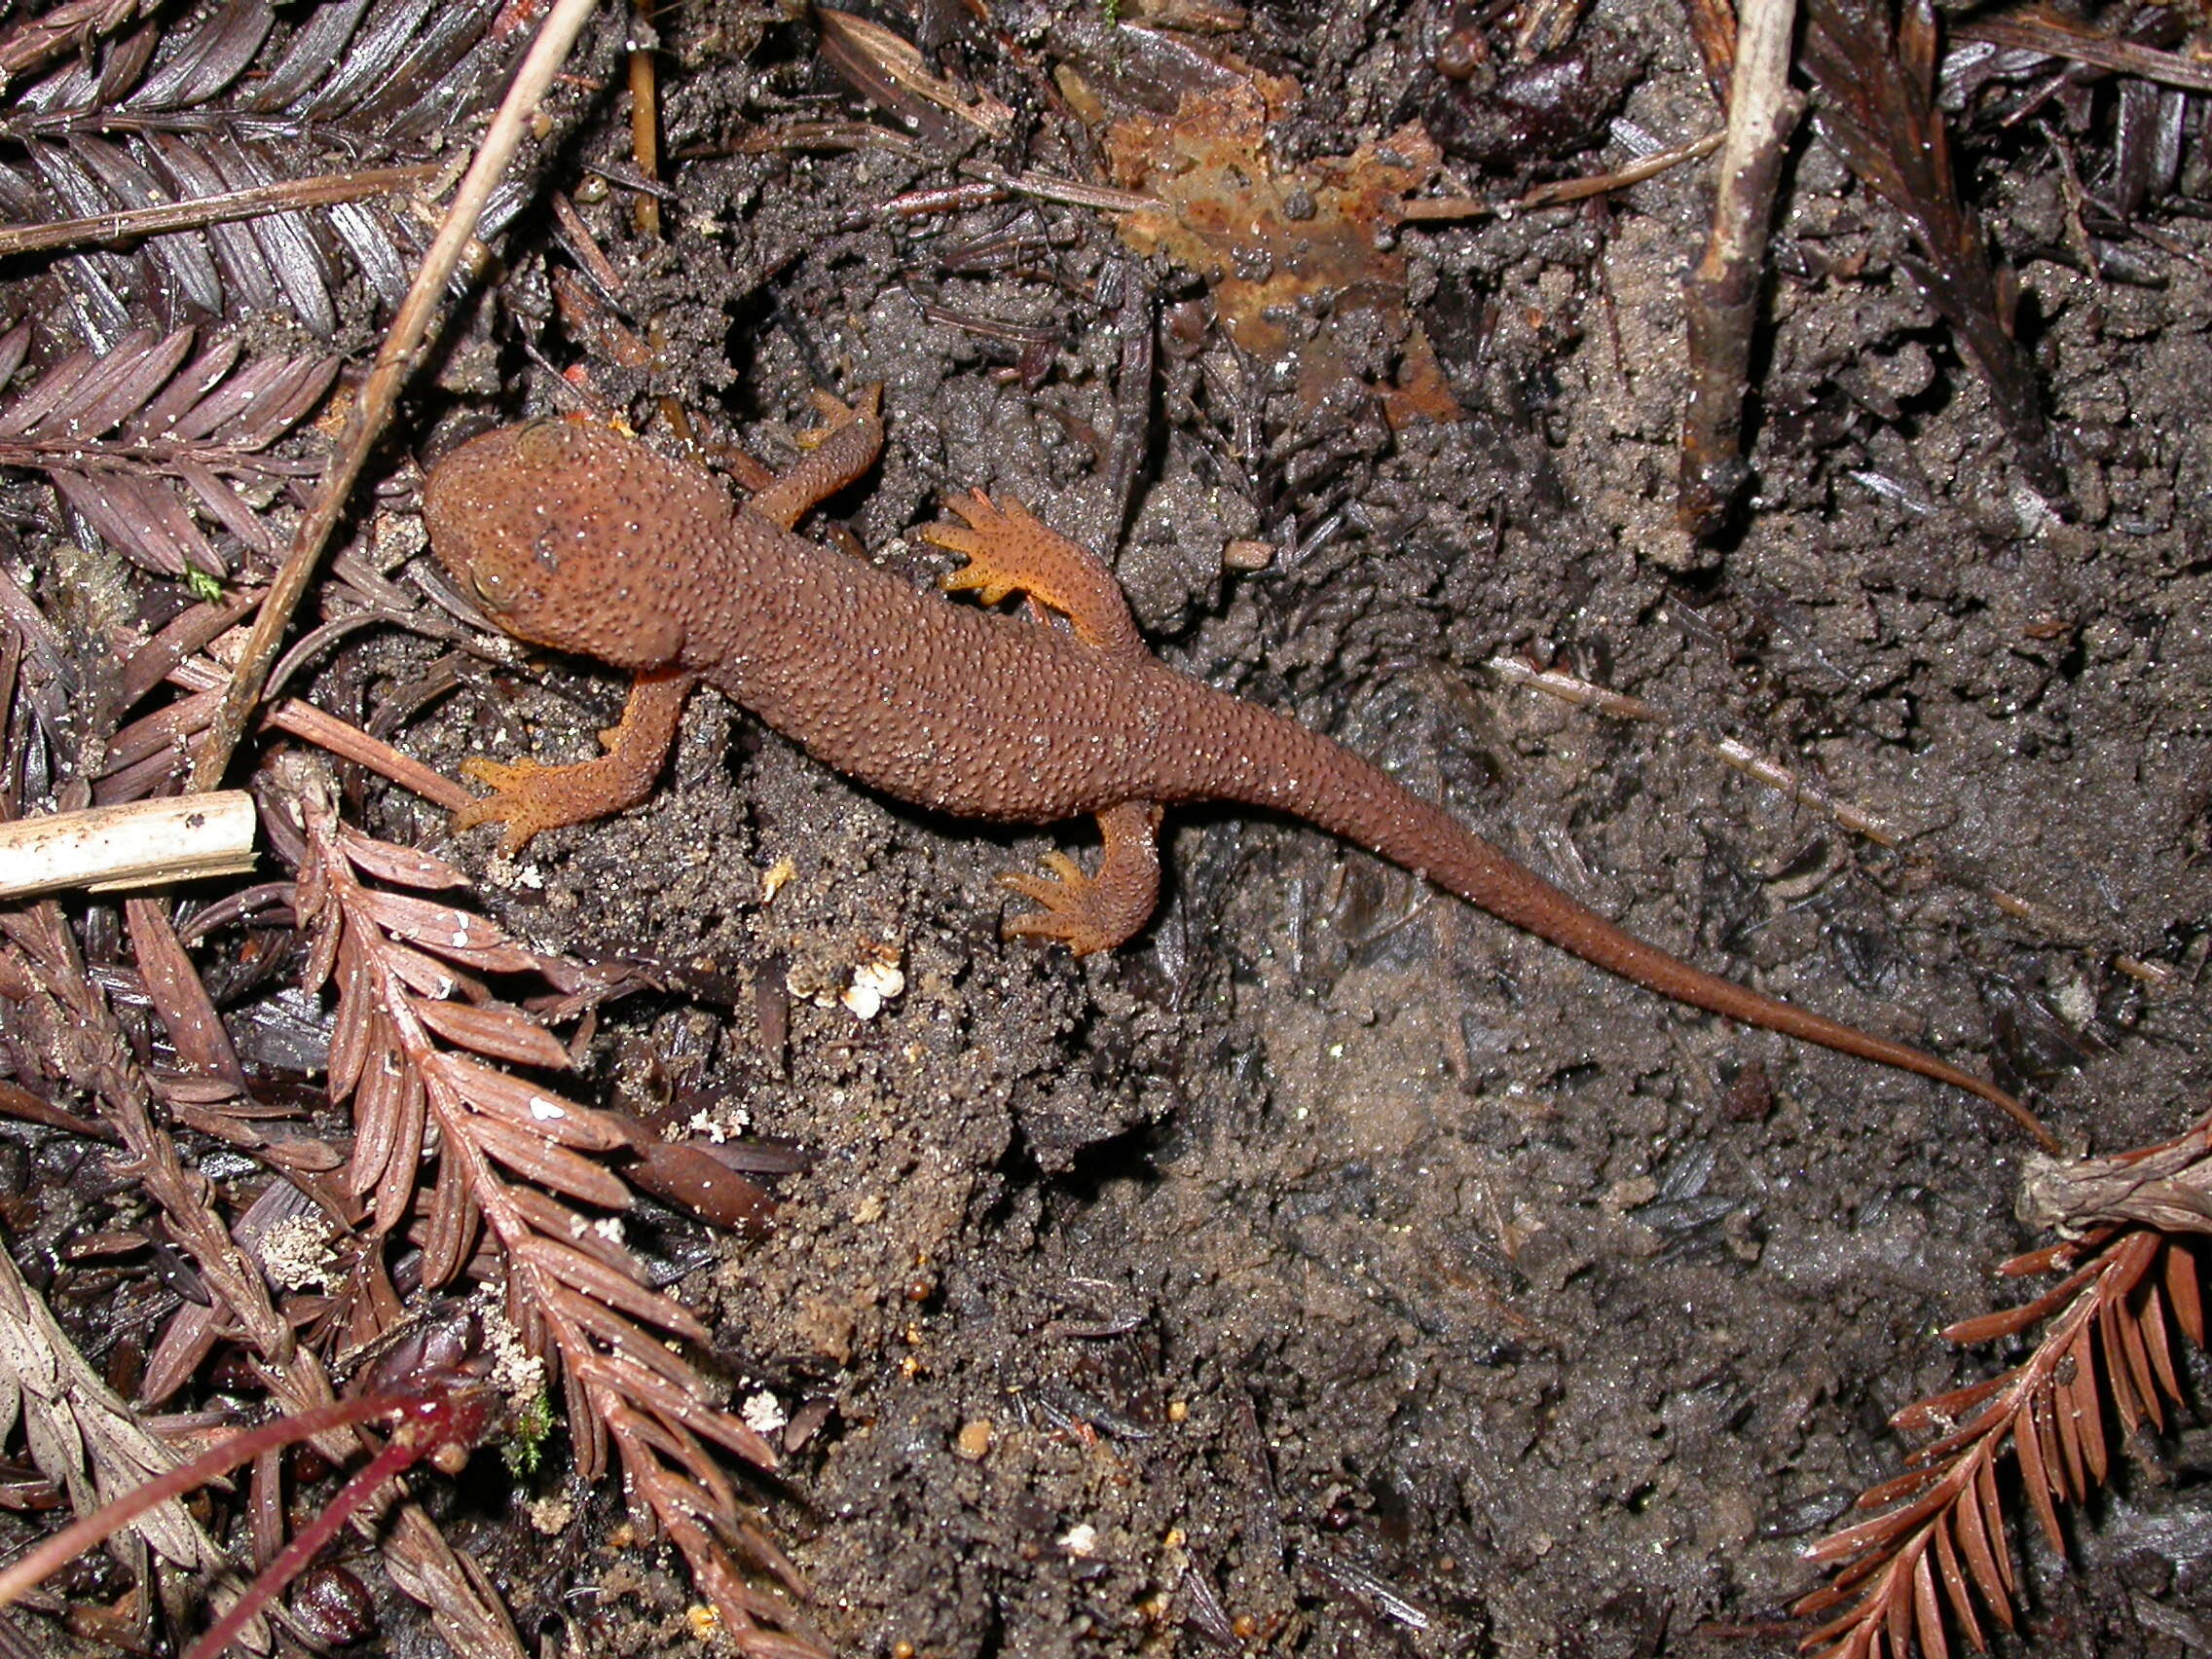 Image of Western North American newts